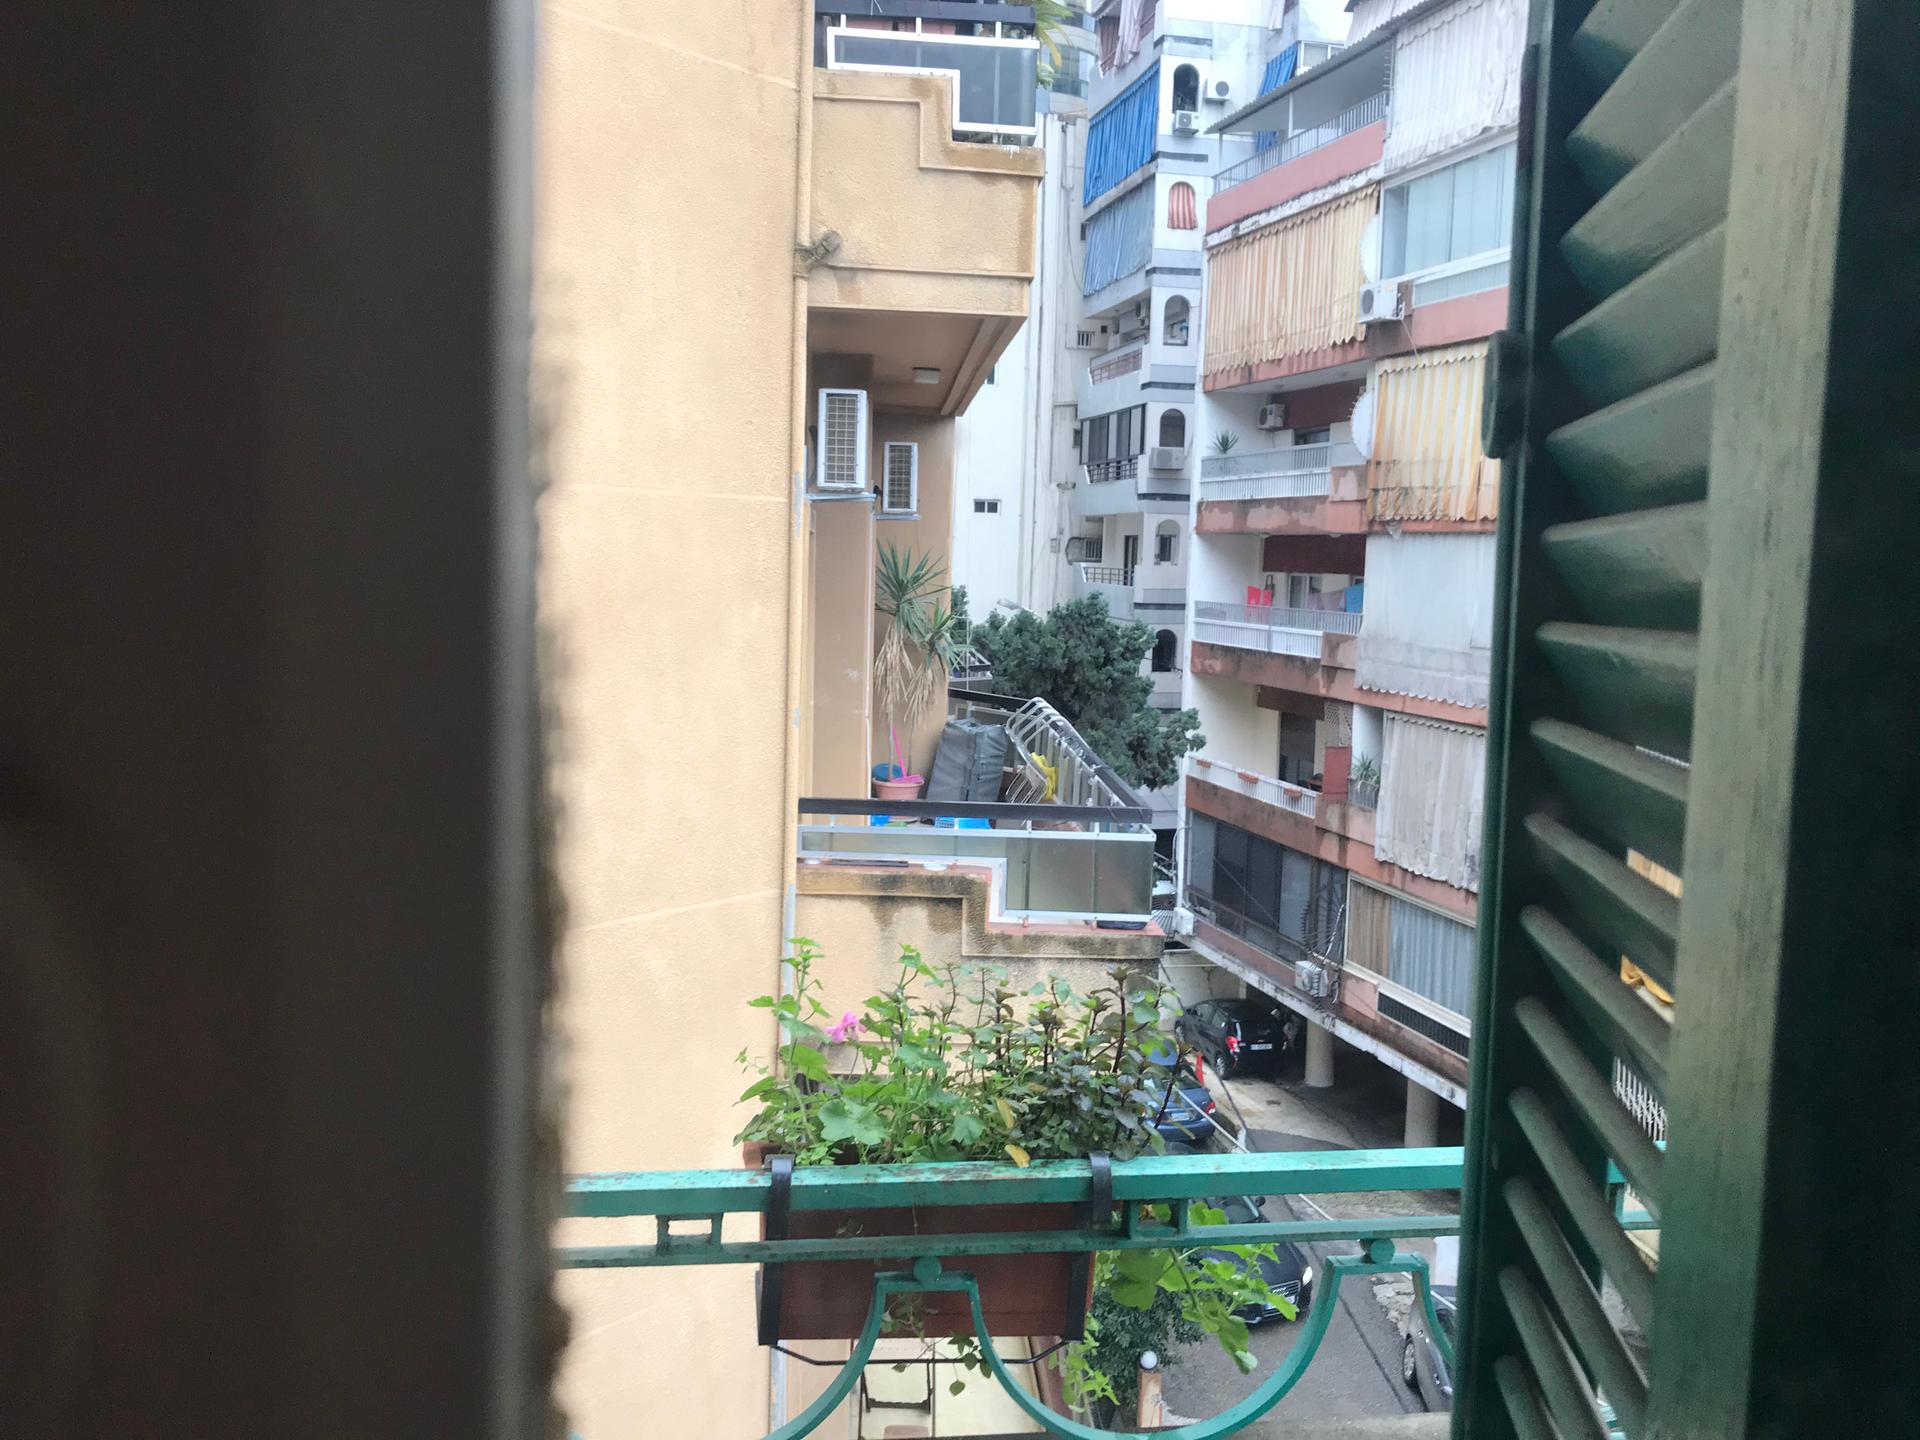 A typical apartment view setting